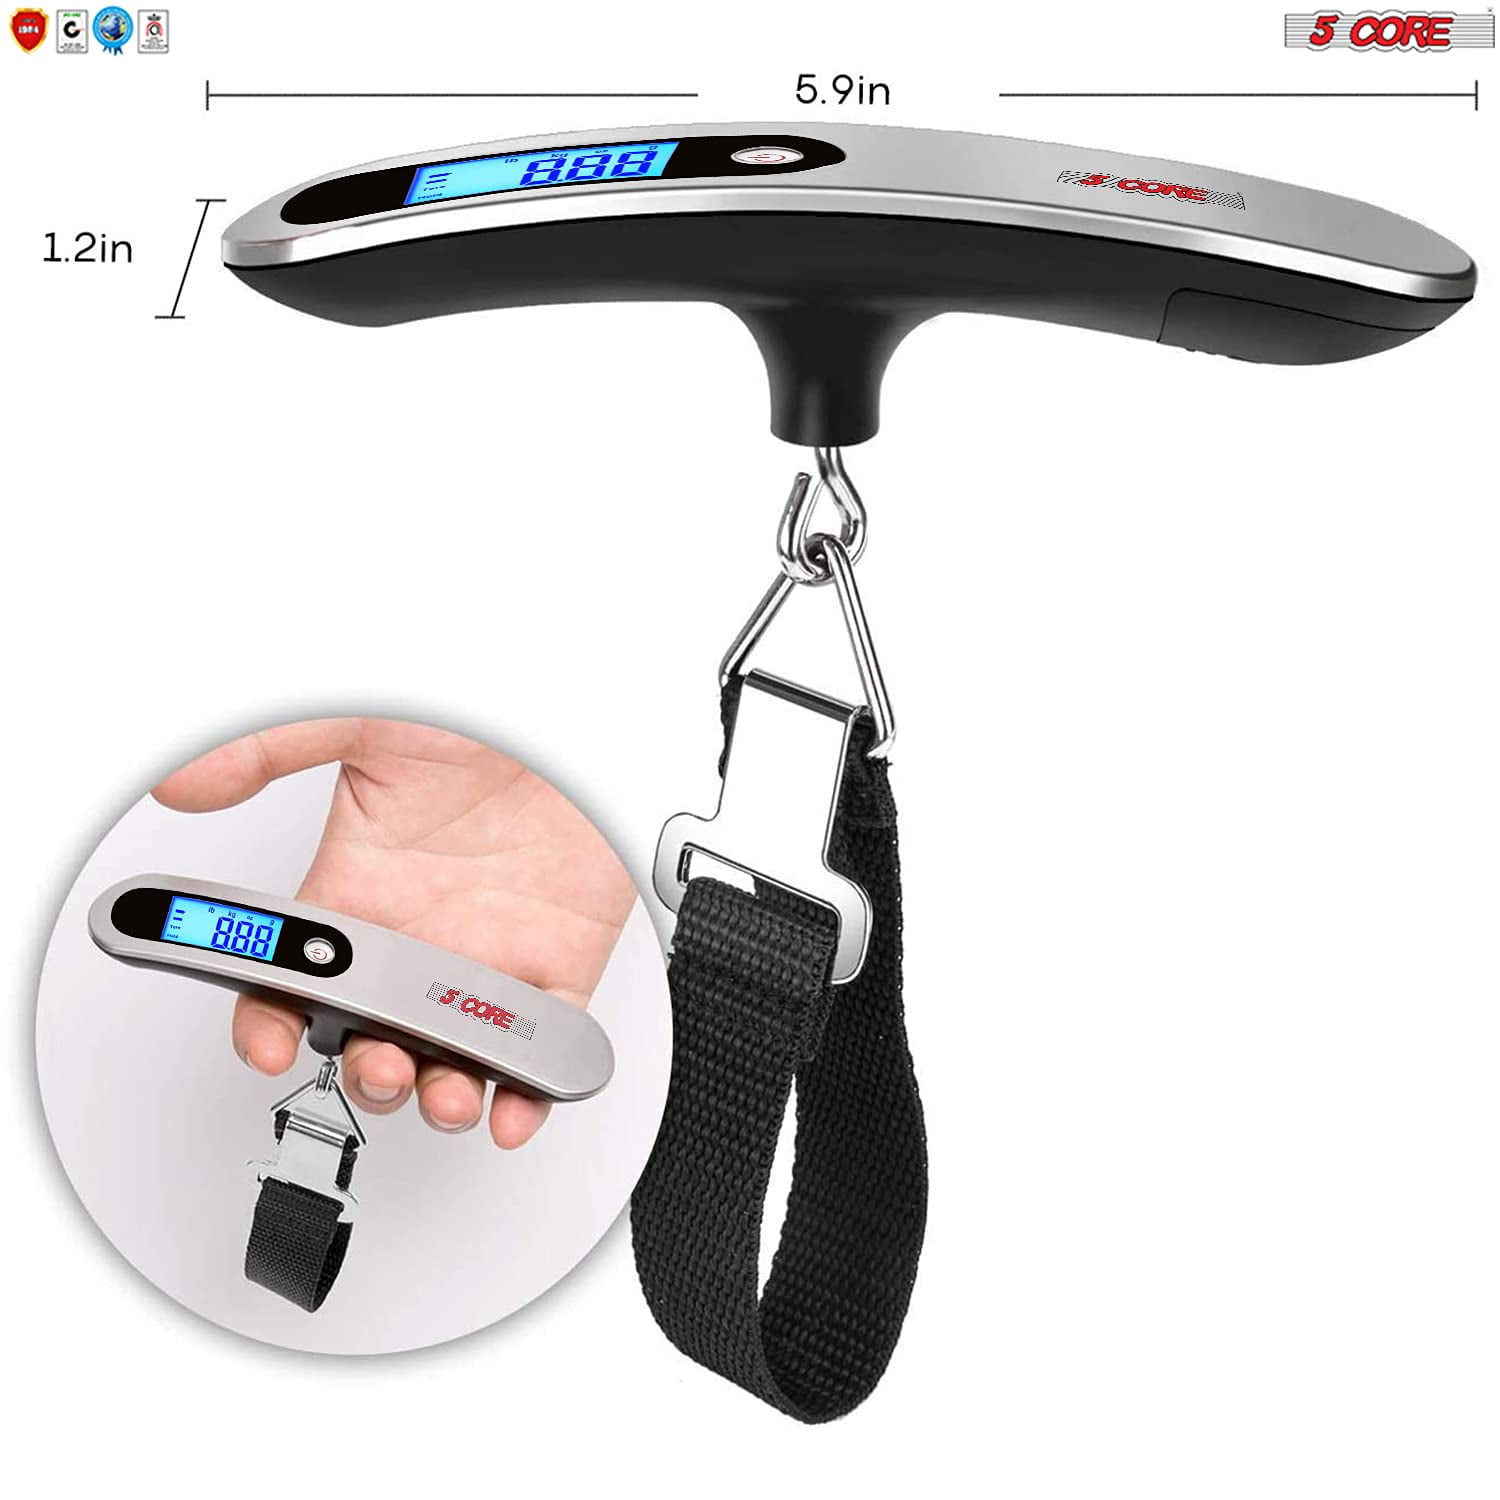 5 Core Luggage Scale Handheld Portable Electronic Digital Hanging Bag  Weight Scales Travel LS-004 2PCS 